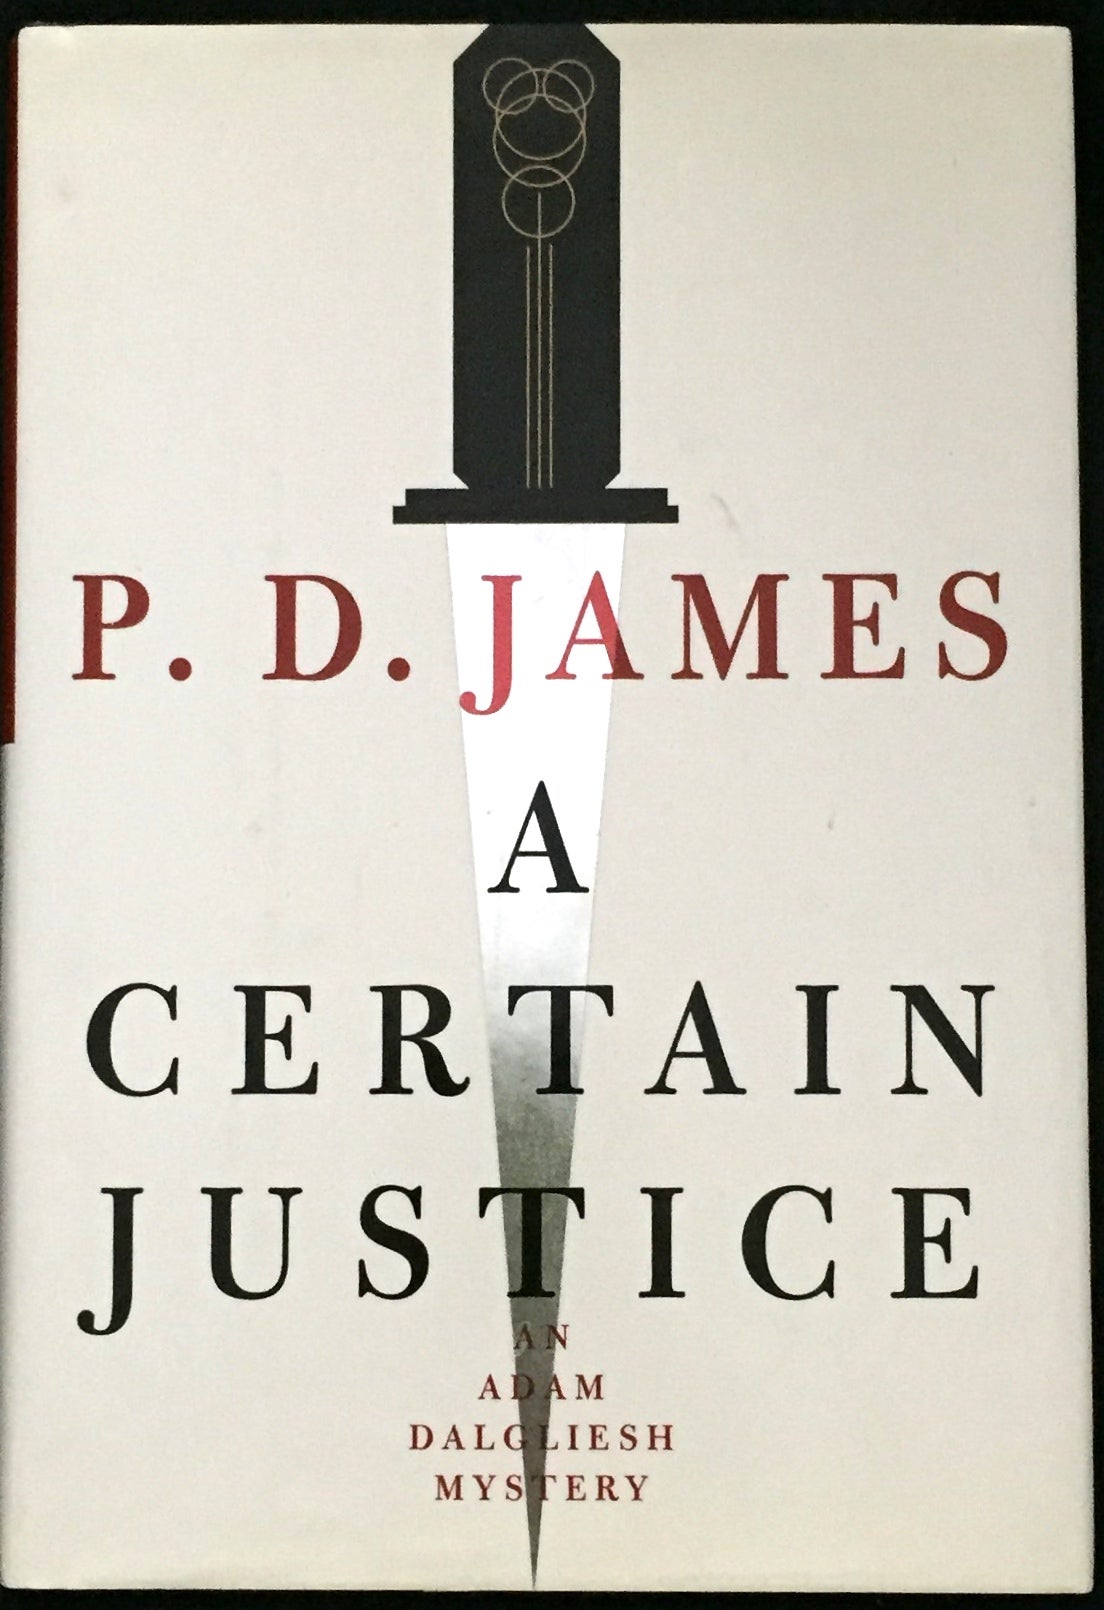 A CERTAIN JUSTICE by P. D. James on Borg Antiquarian